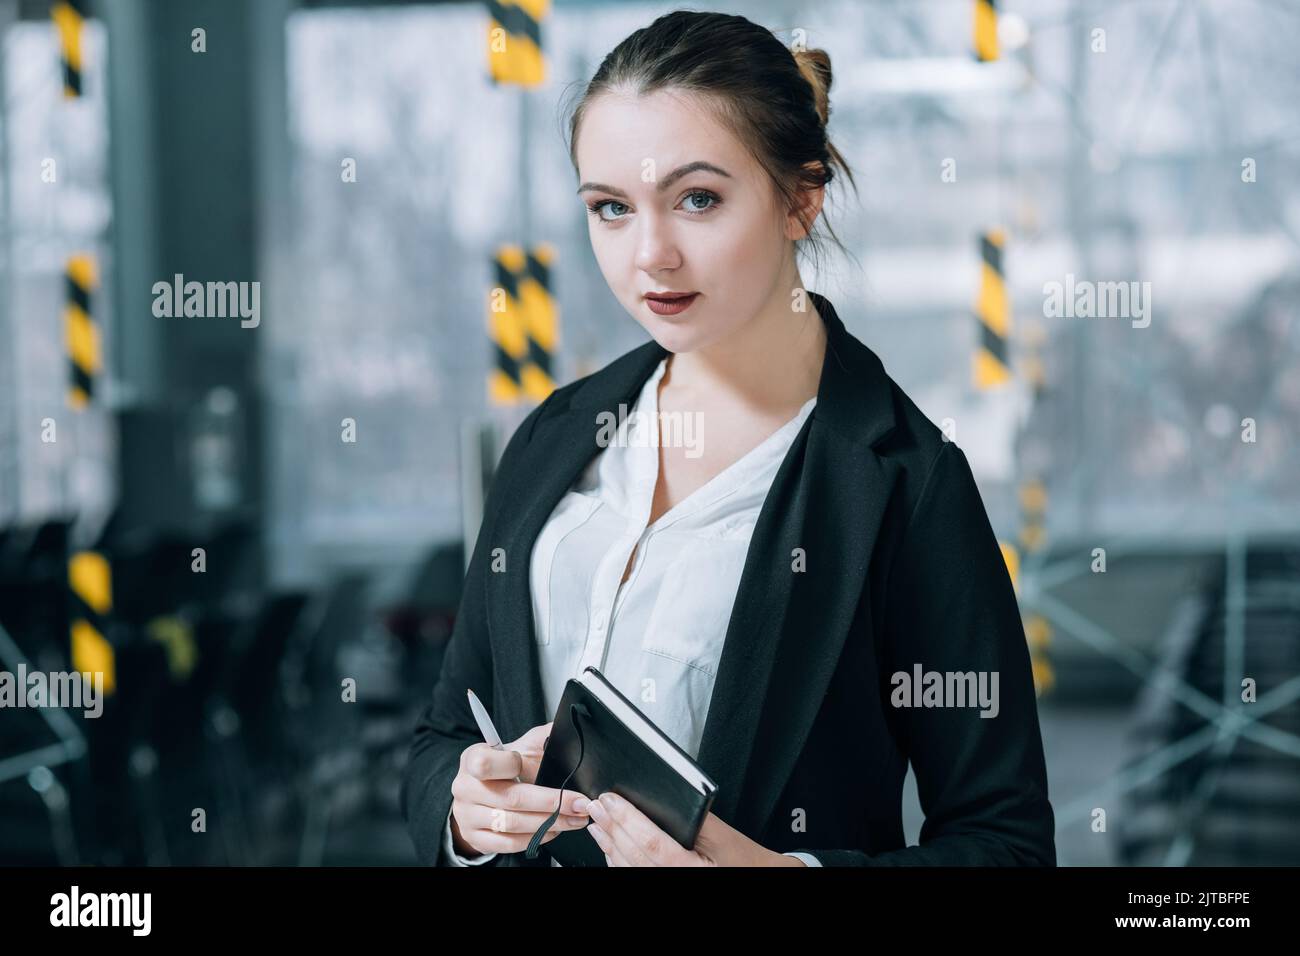 business employee young woman office workspace Stock Photo